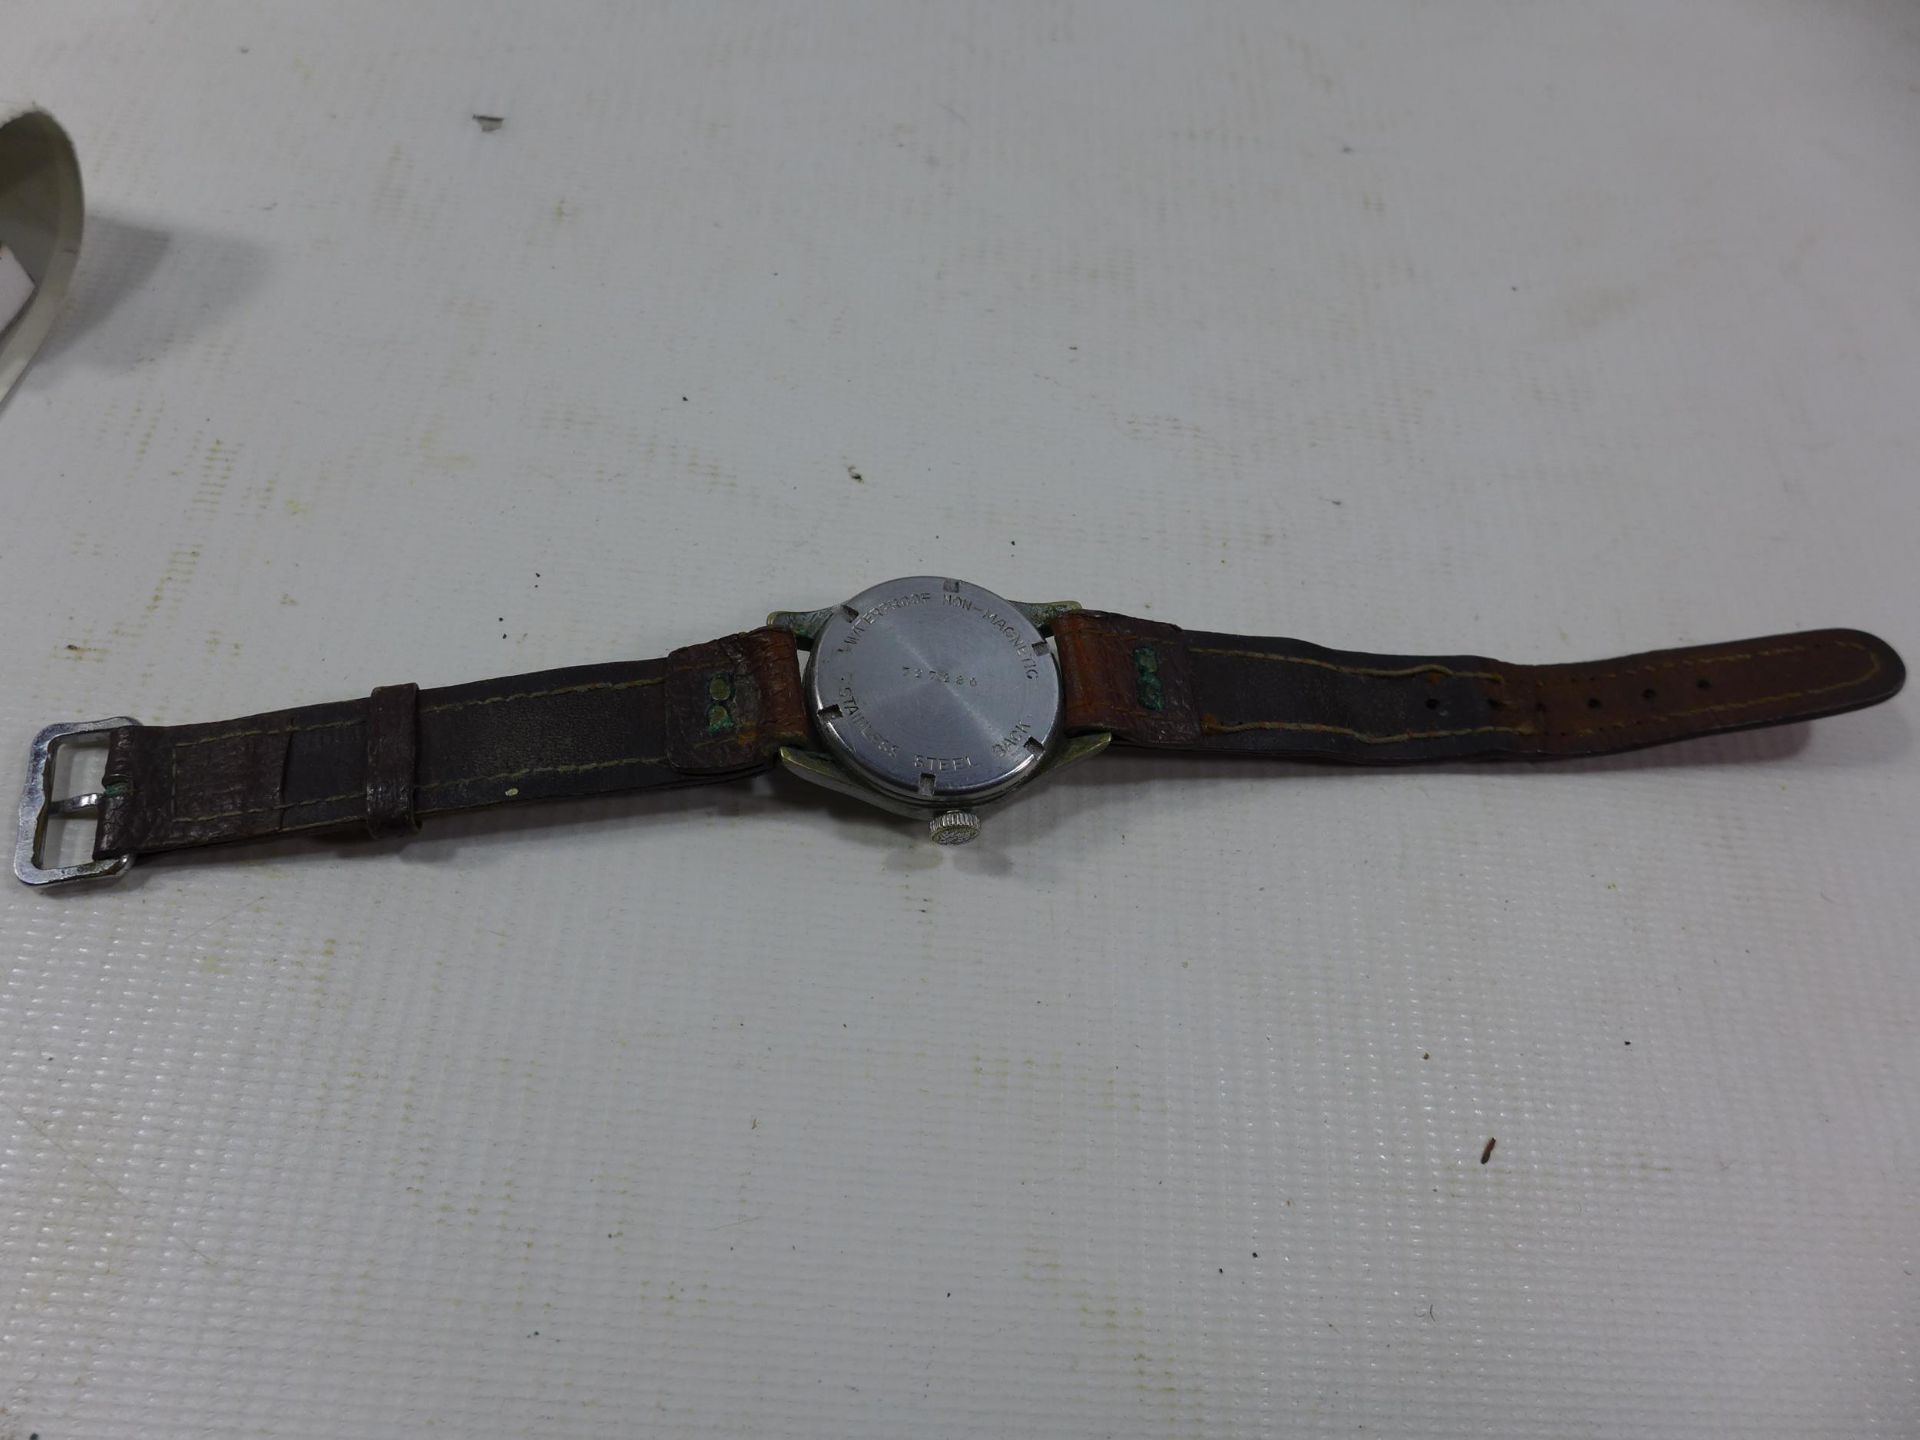 A TITUS MANS WRISTWATCH, DIAMETER OF FACE 2.5CM, NOT WORKING WHEN CATALOGUED - Image 4 of 4